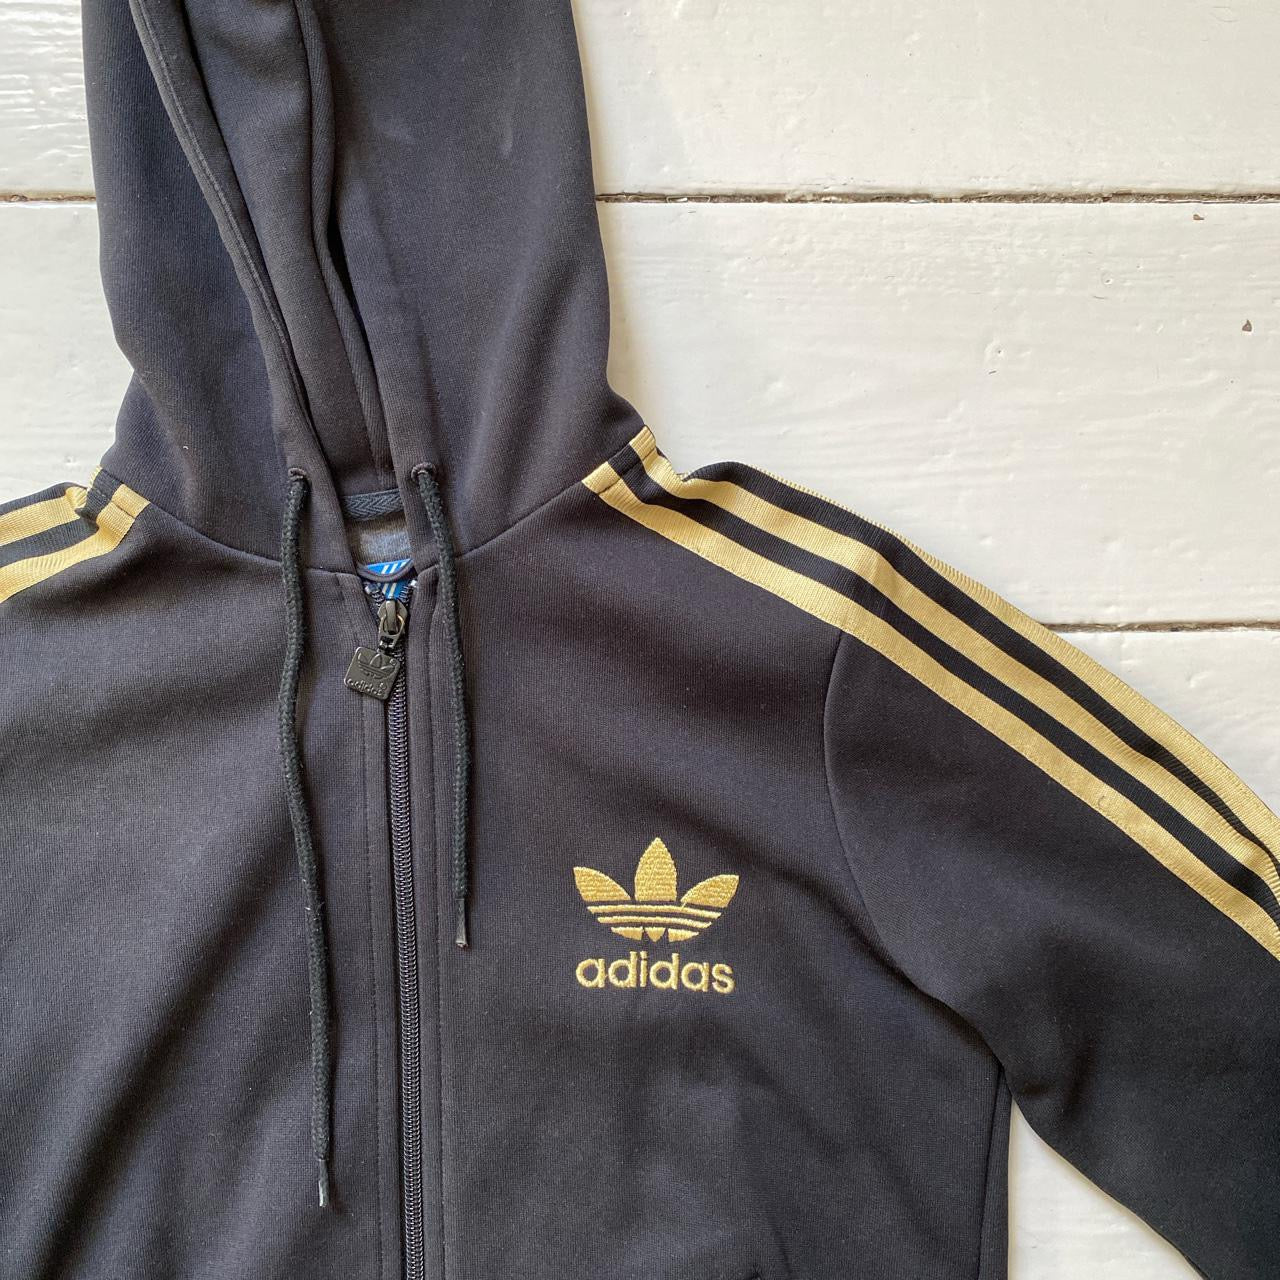 Adidas Black and Gold Hoodie (Size 8)